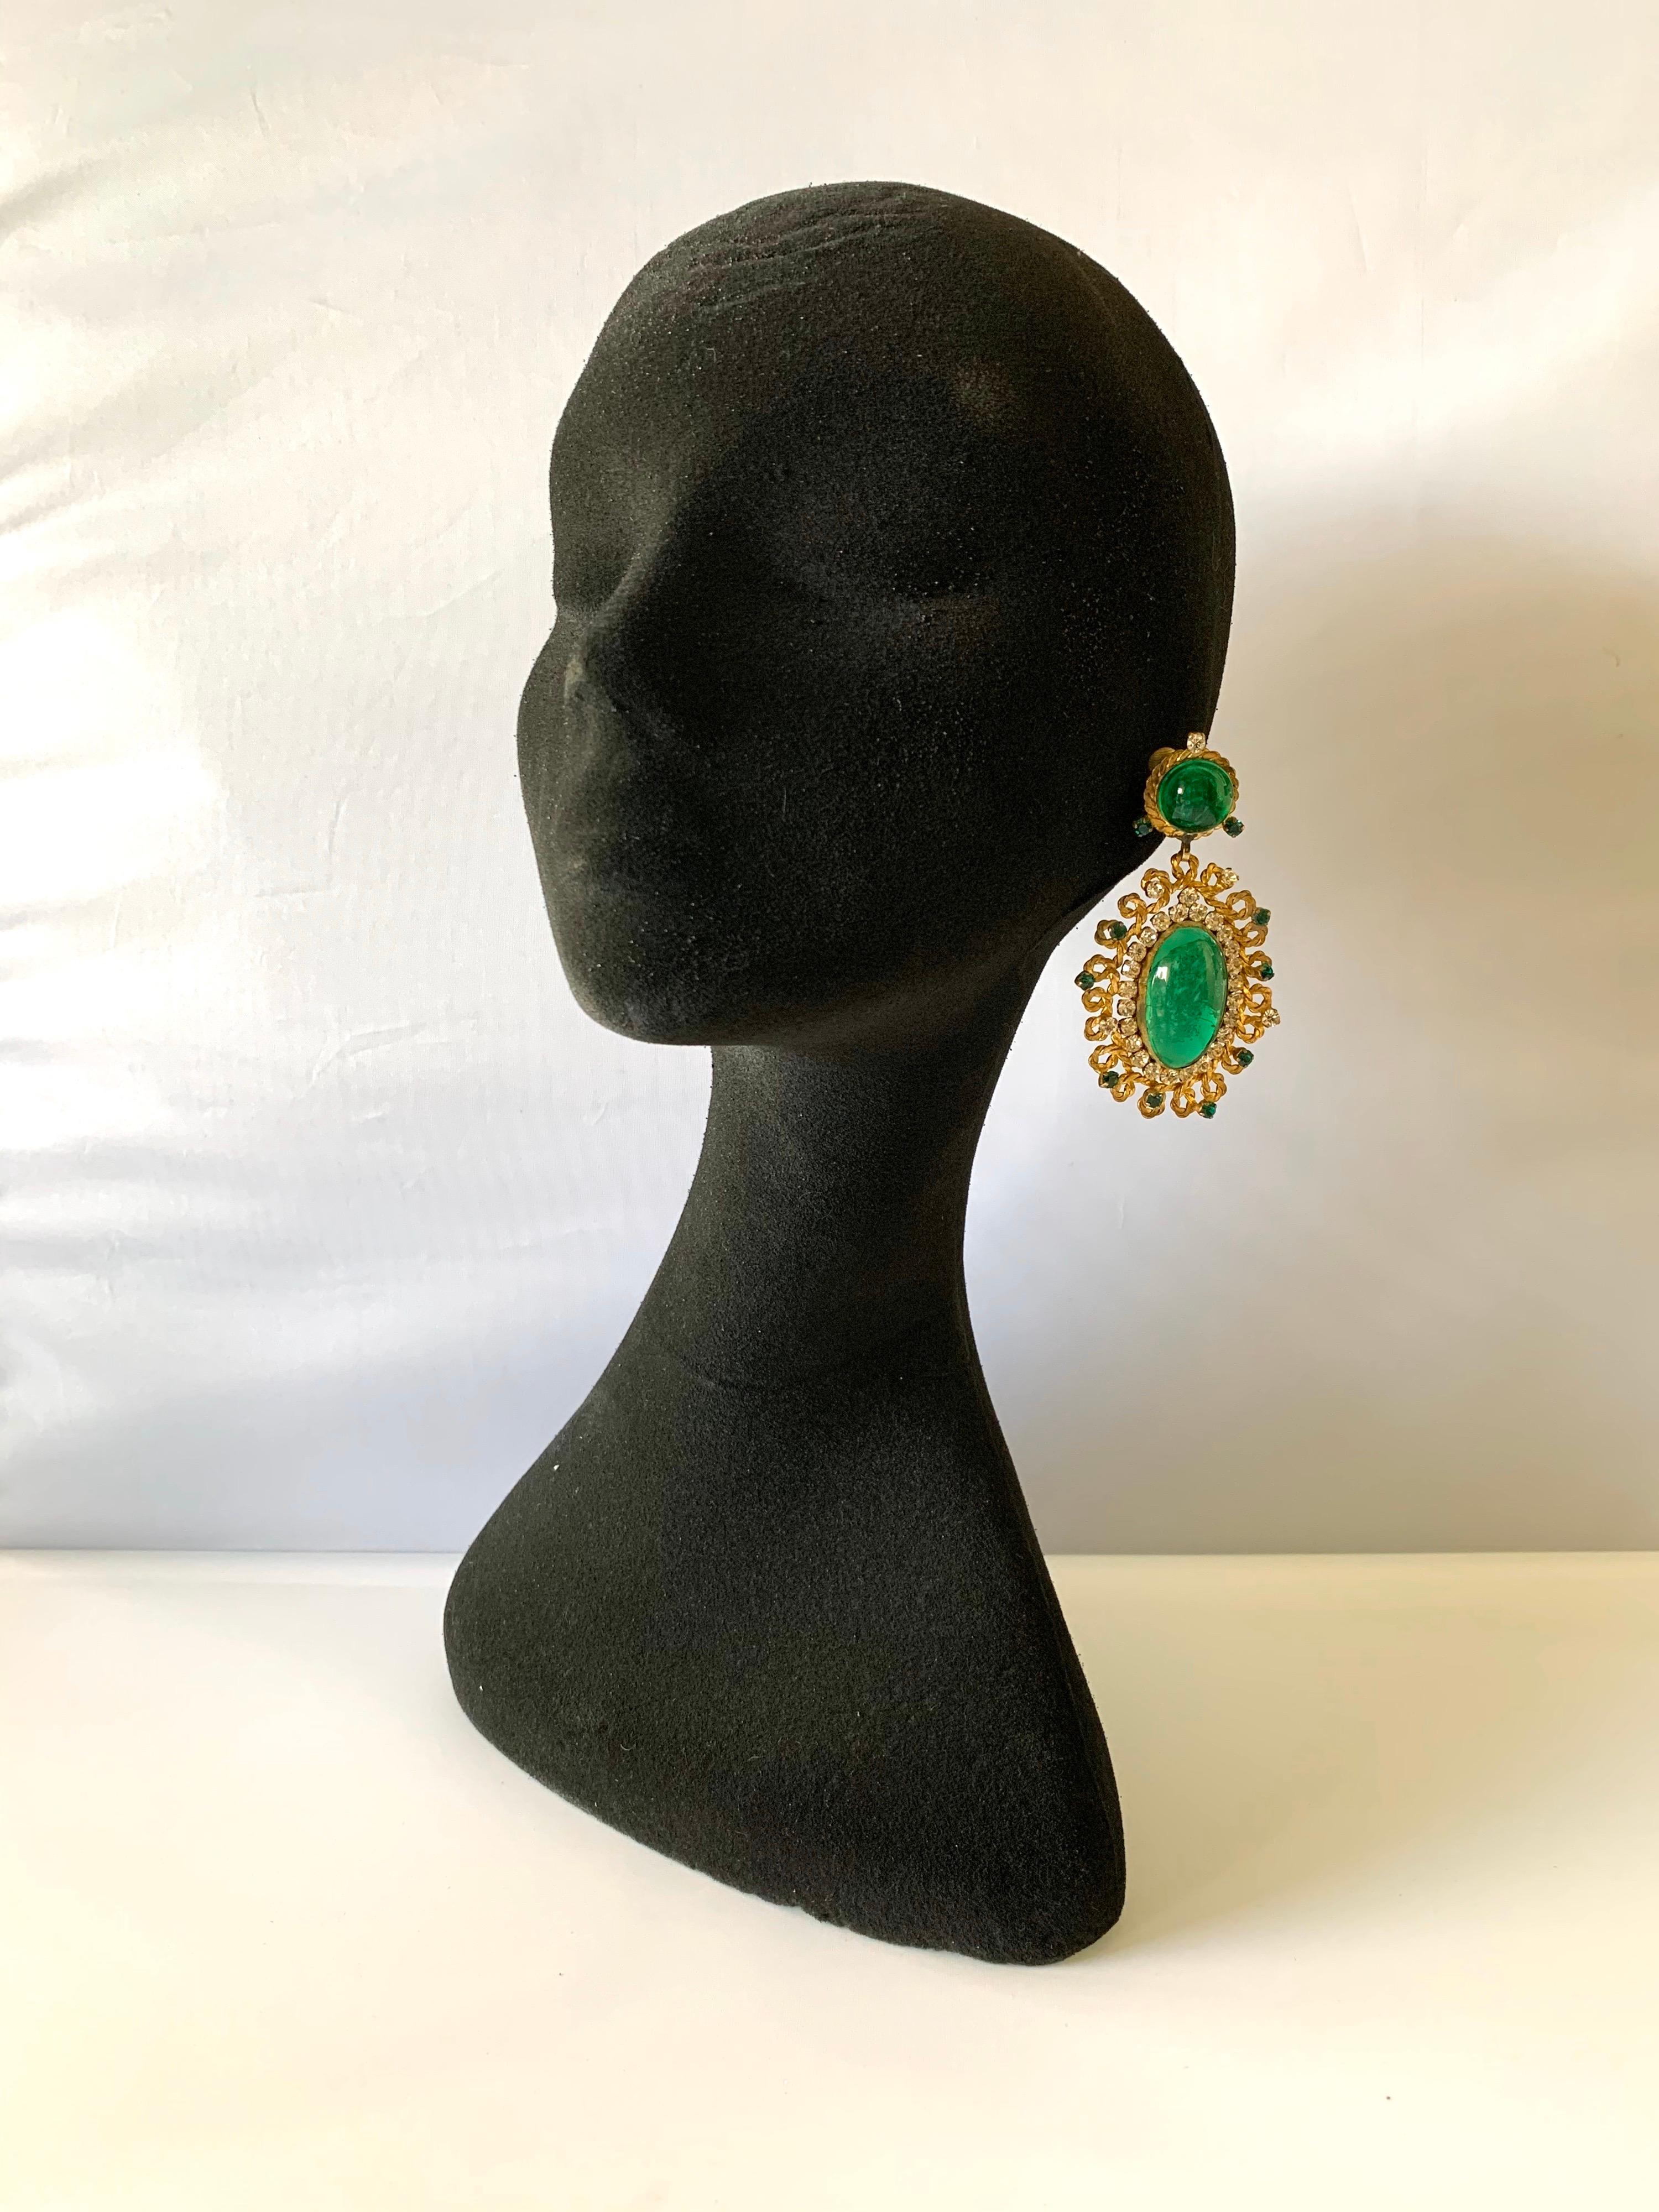 Exceptional vintage large faux emerald and diamante drop clip-on statement earrings - the statement earrings are comprised out of hand-manipulated gilt metal and feature an ornate design which is accented by diamante and emerald diamante rhinestones